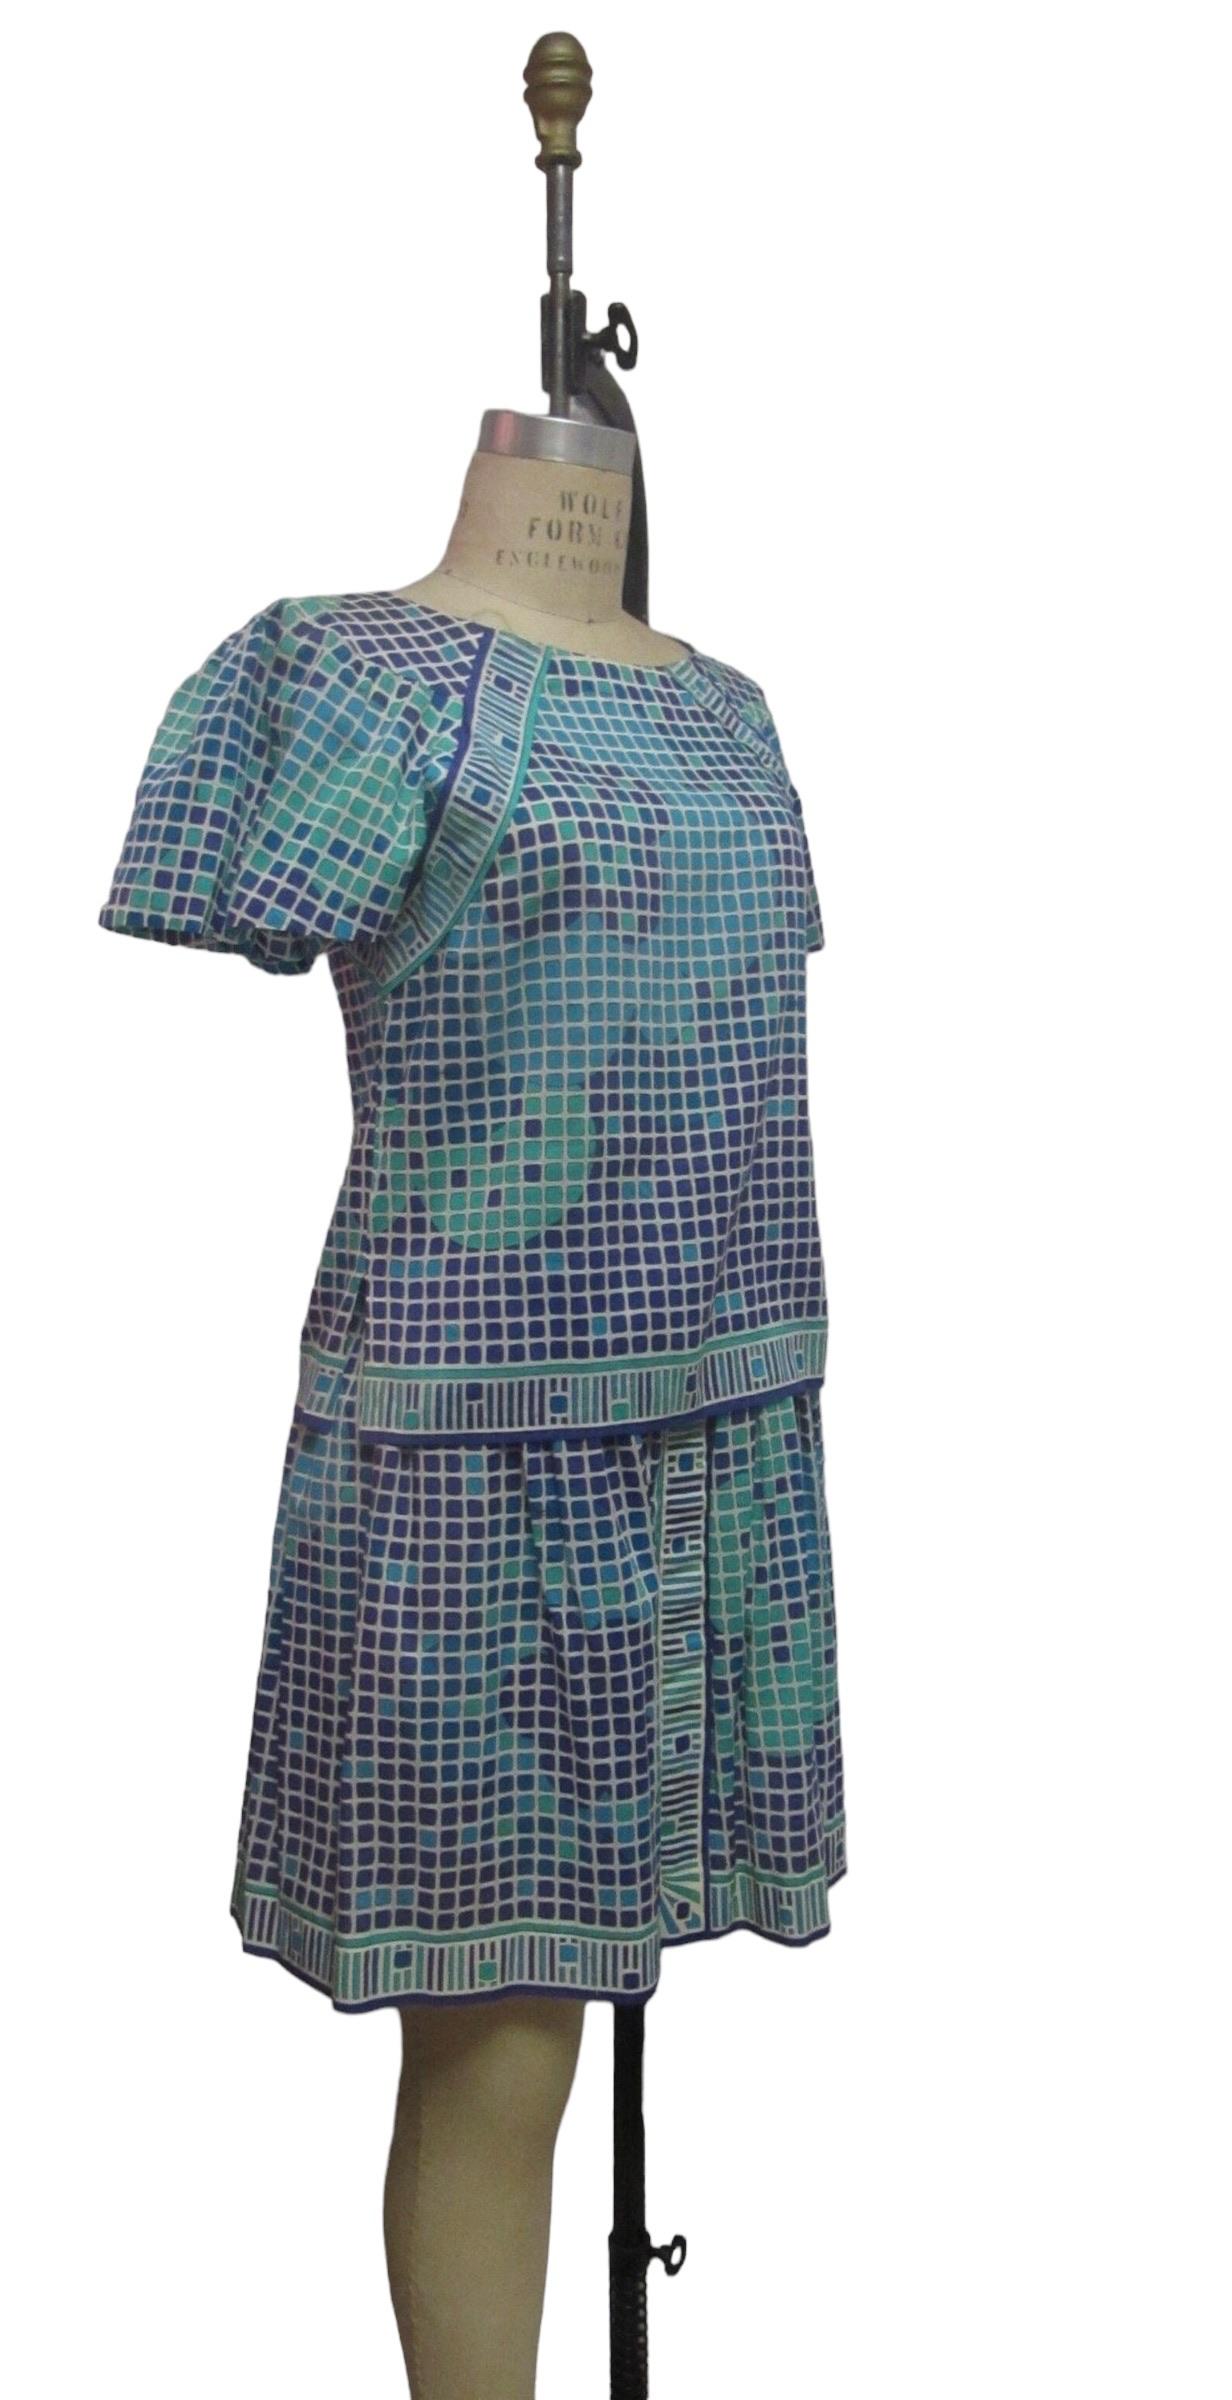 Emilio Pucci Cotton Geometric Print Top and Skirt Set, Circa 1960s For Sale 2